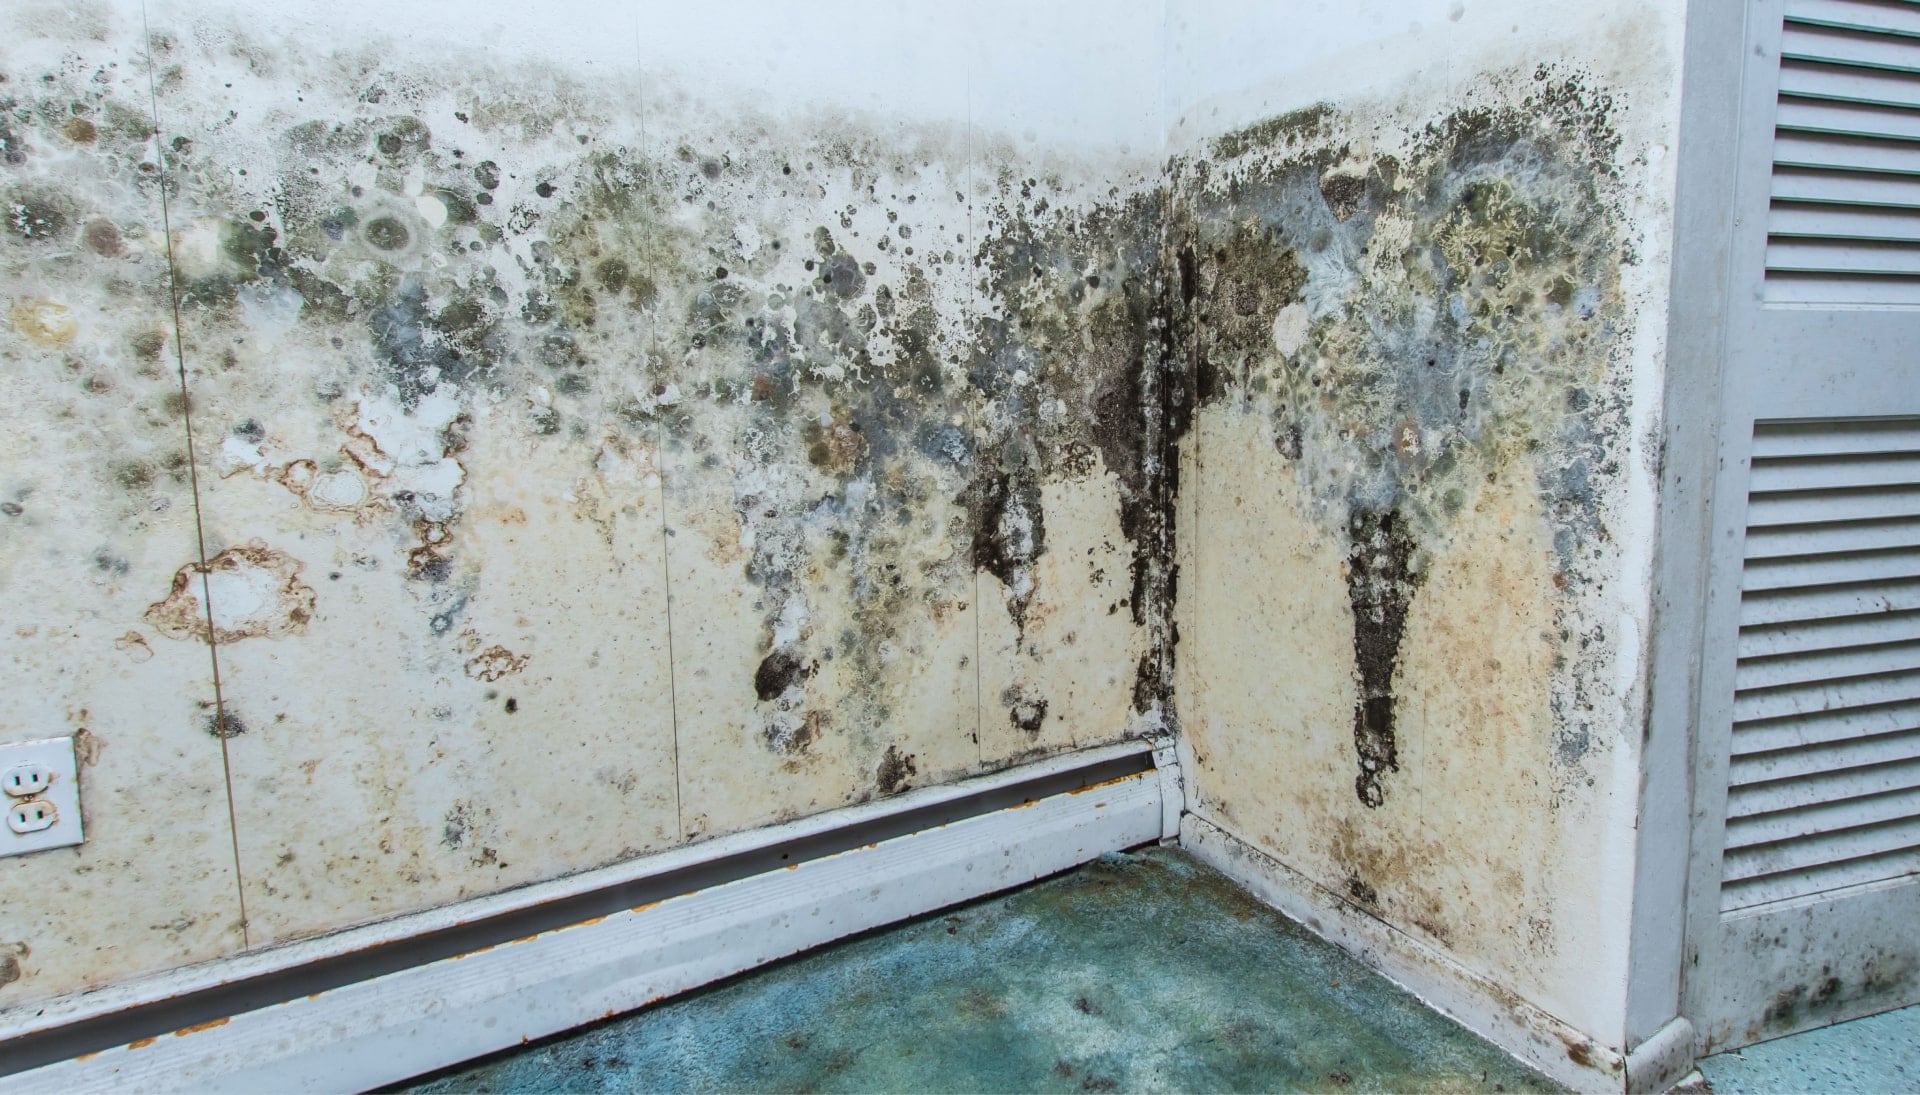 Professional mold removal, odor control, and water damage restoration service in Dublin, Ohio.